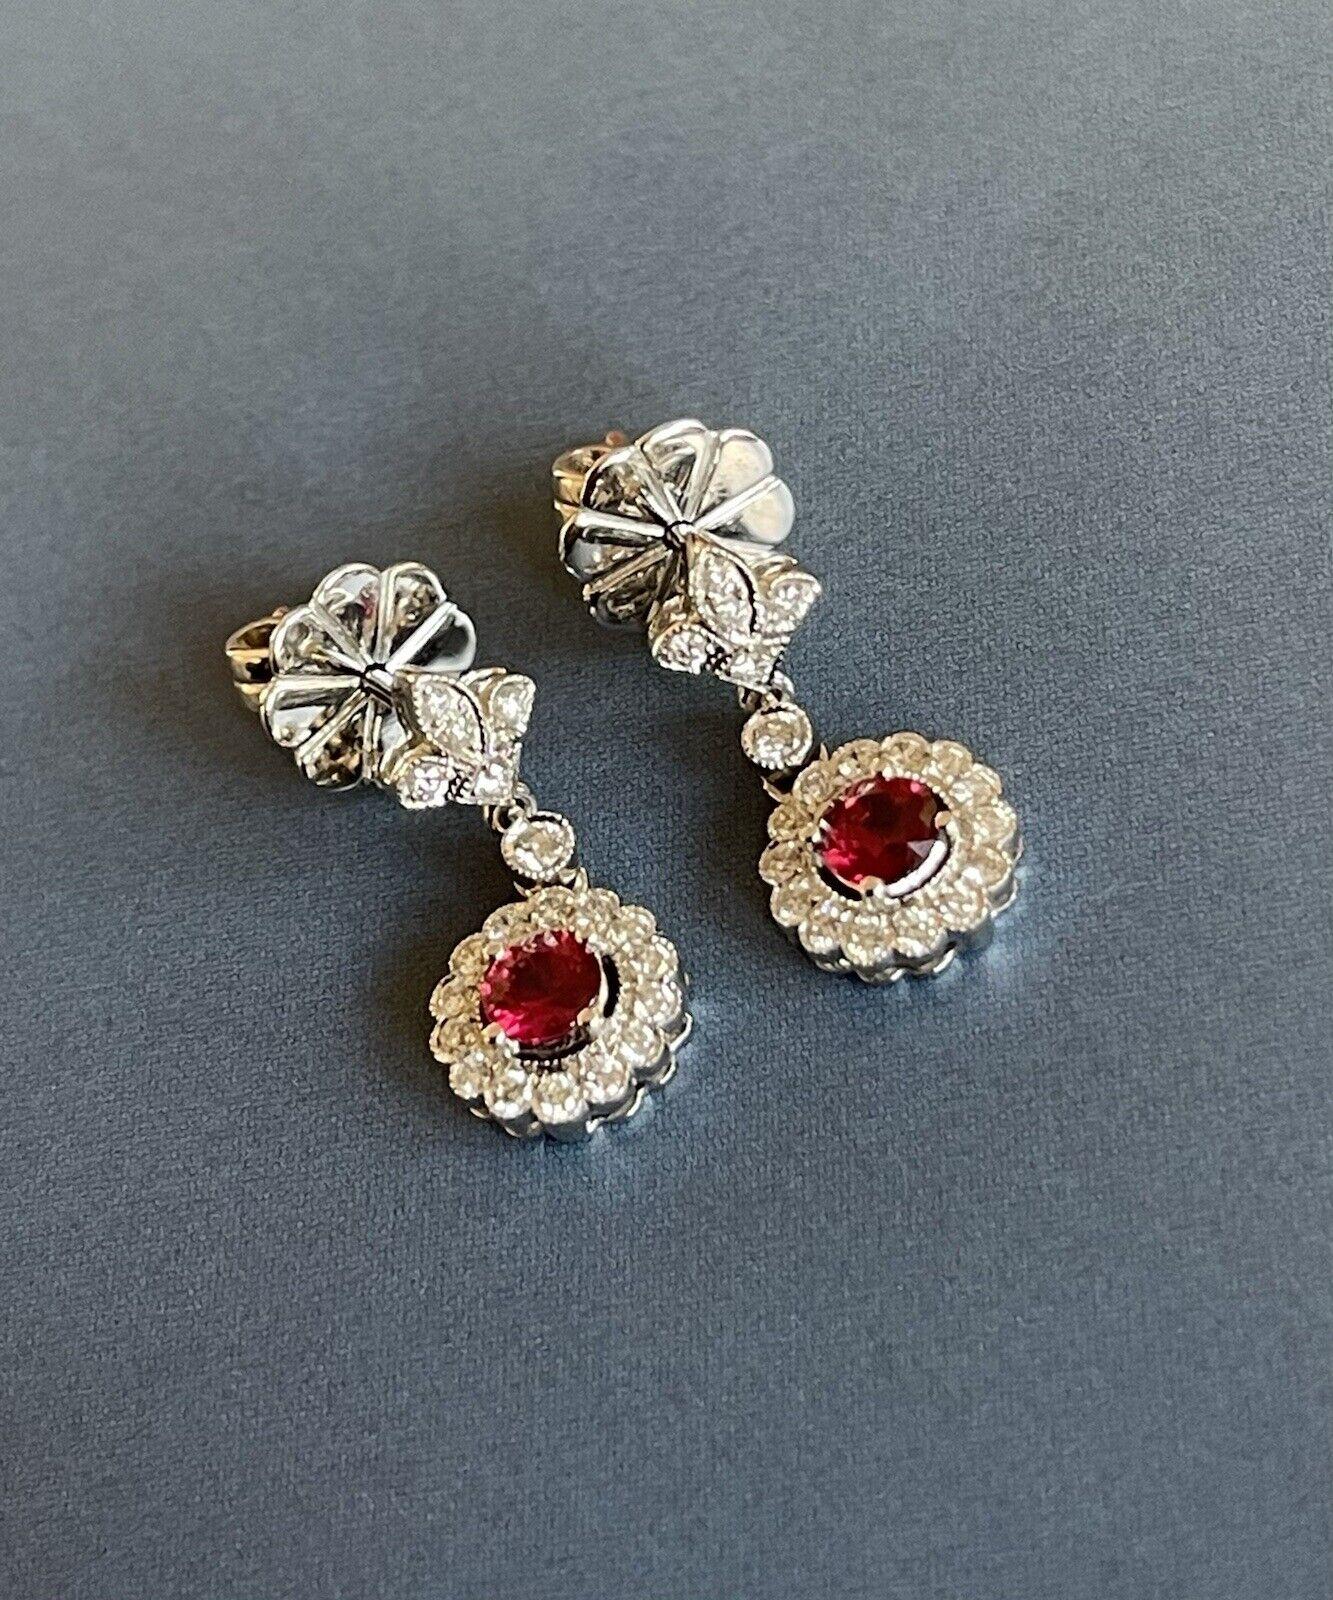 
Classic fine jewellery meets modern chic


Gorgeous round halo studs adorned with over half carat Diamond and 0.40ct Ruby stones

Milgrain settings adds an amazing character these beautiful Diamond Drop Earrings


Perfect for wedding season,